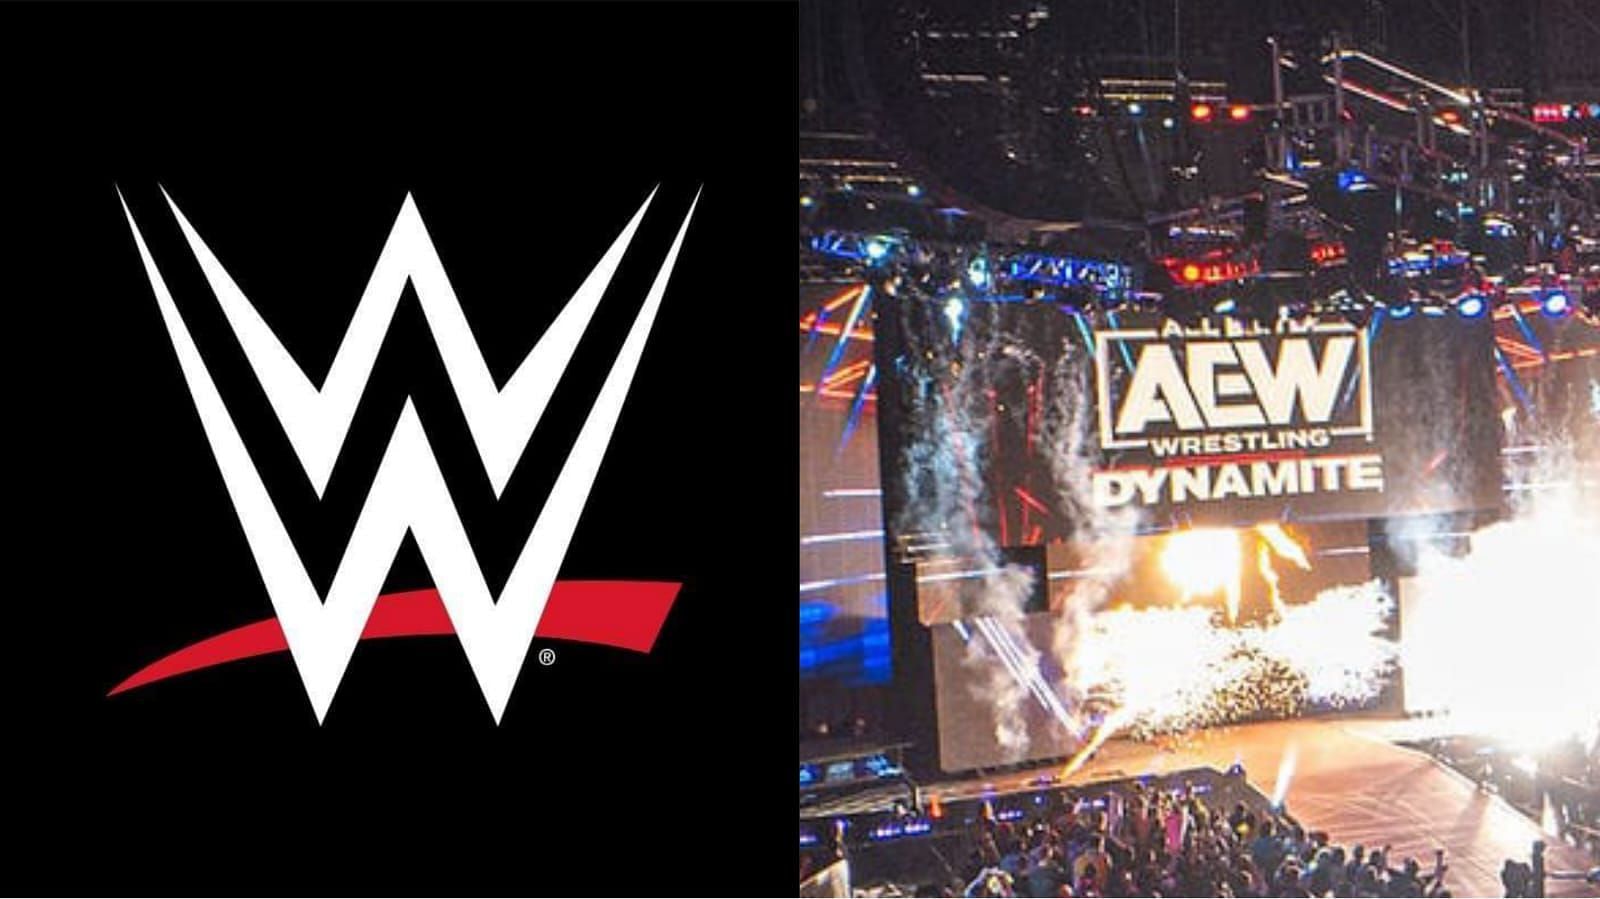 WWE and AEW are currently two biggest wrestling promotions